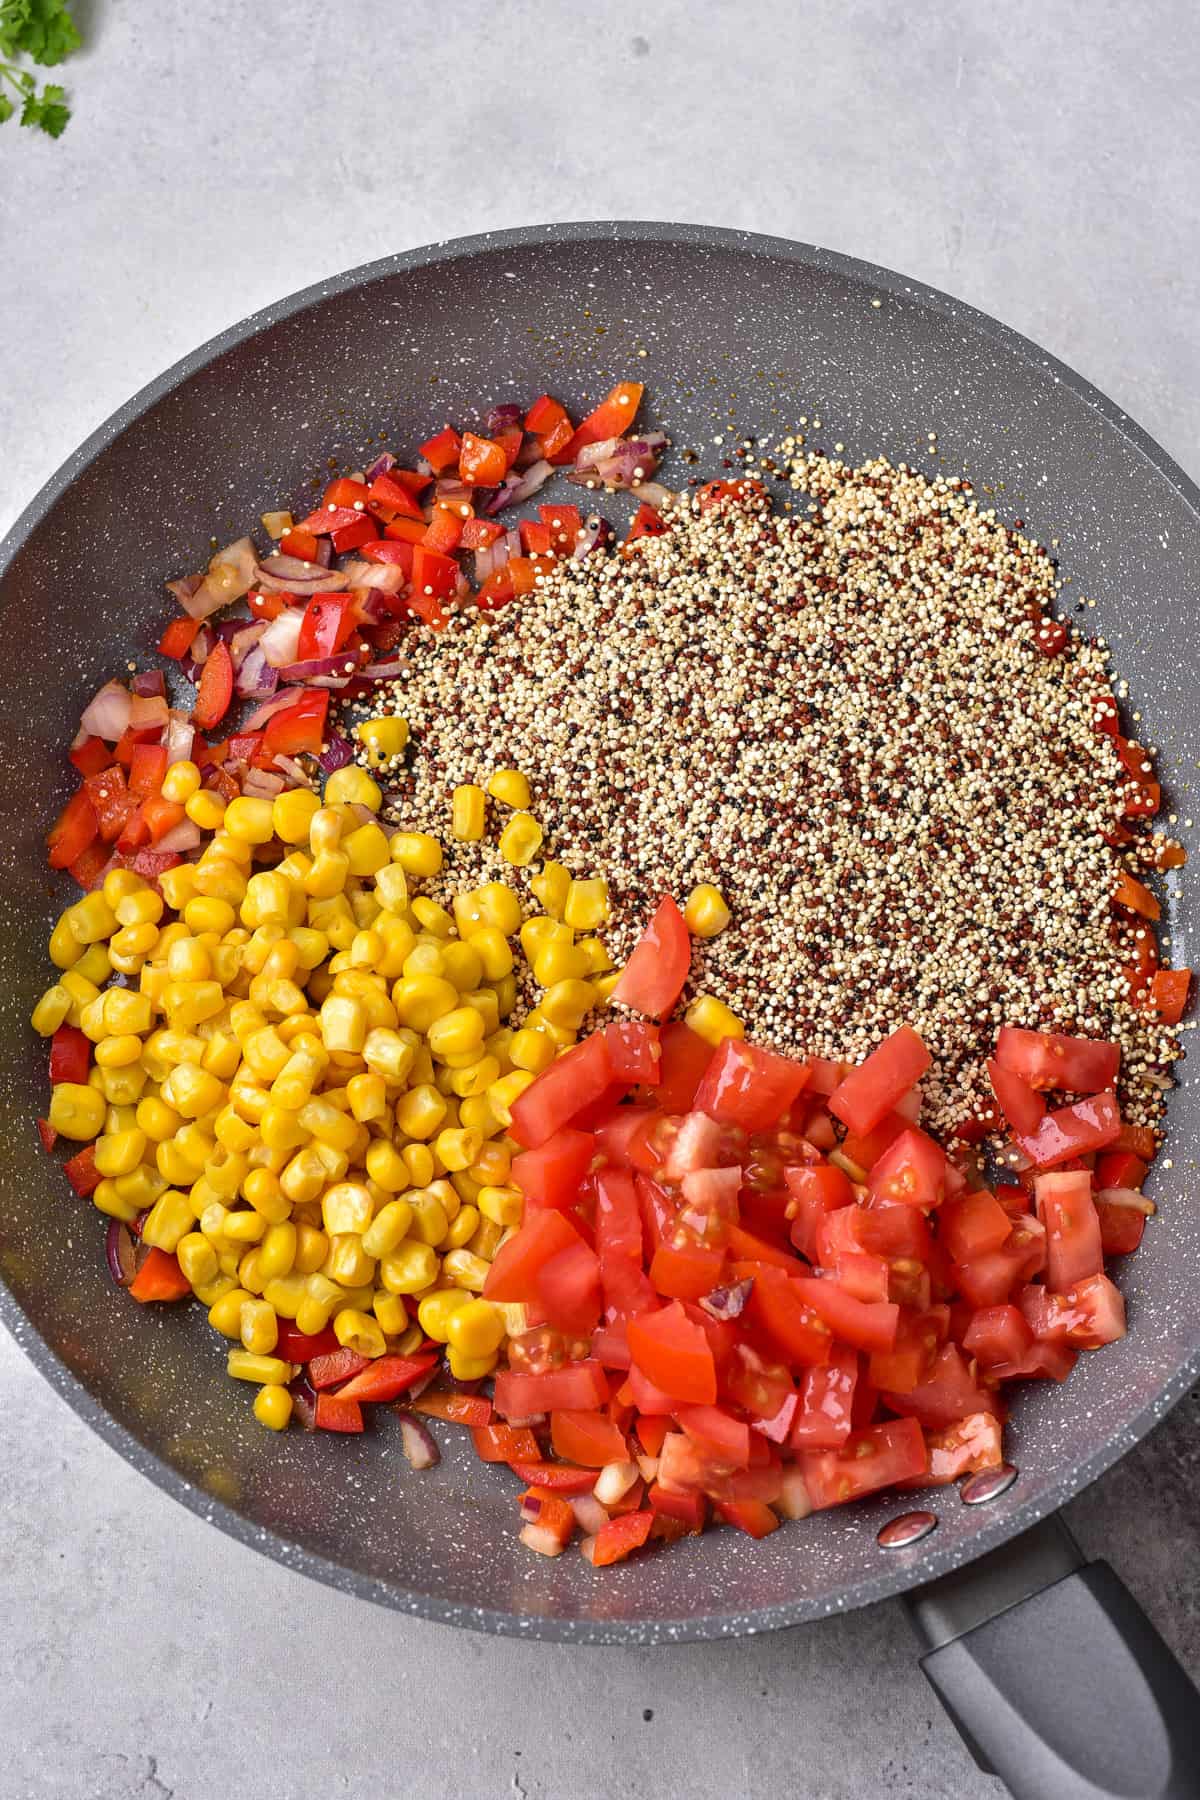 Pan of quinoa and vegetables.